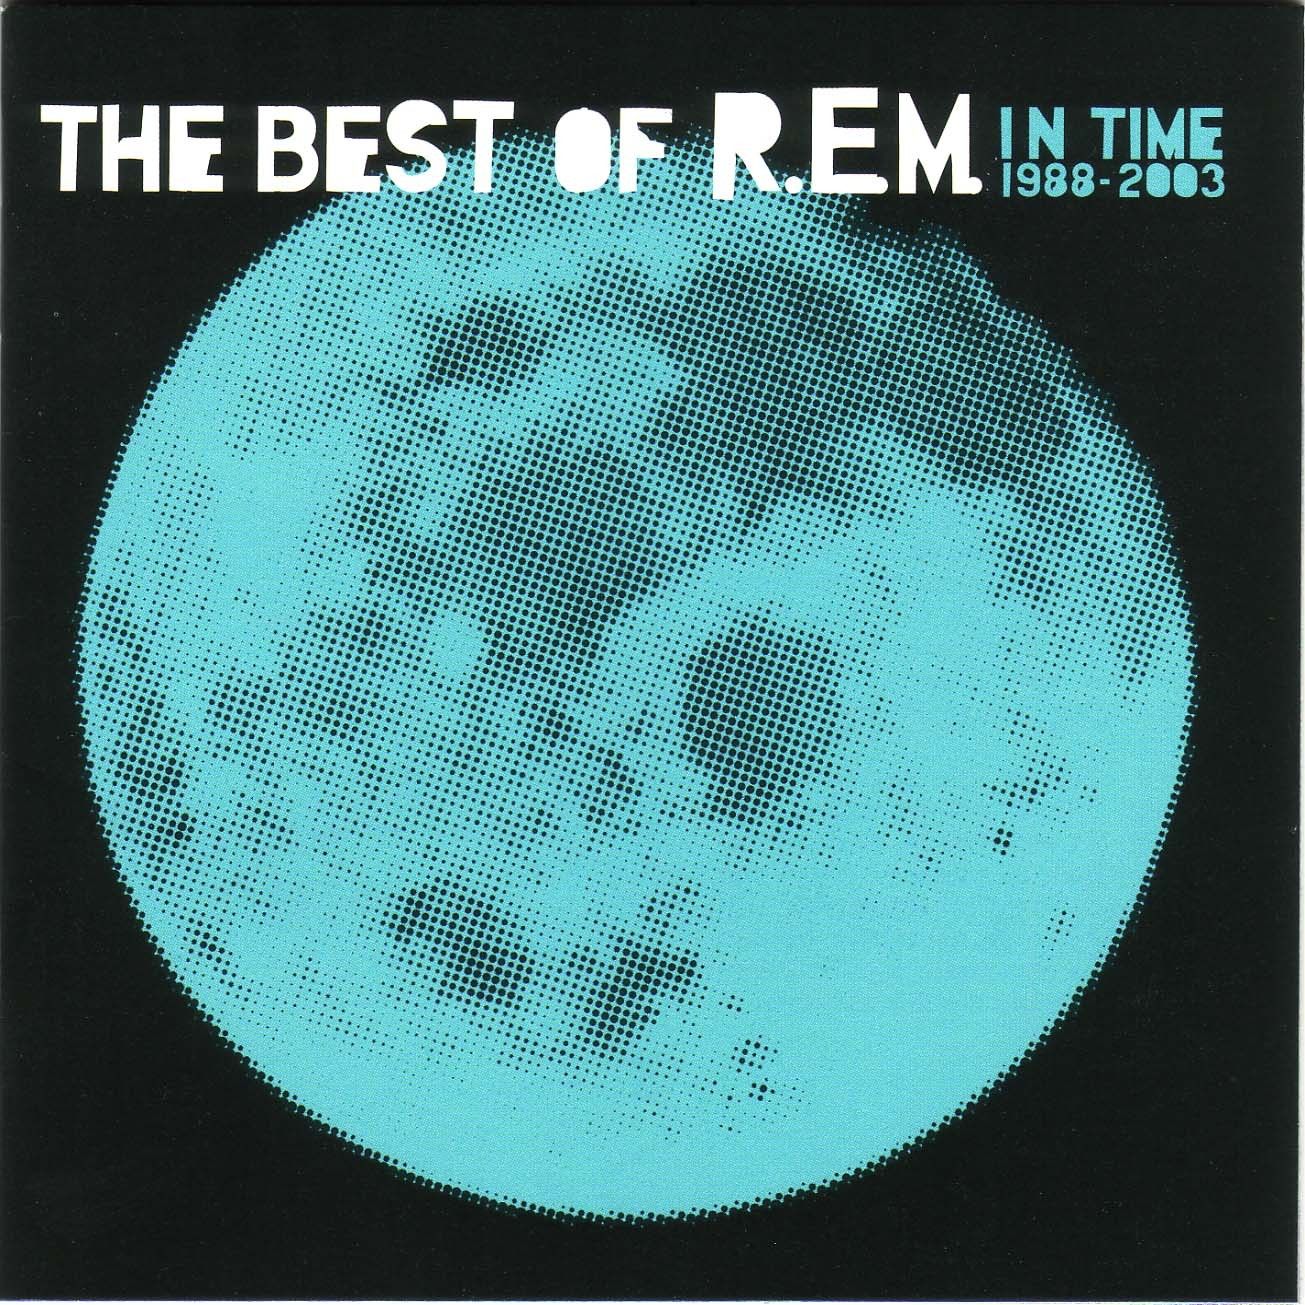 R.EM. - The Best of R.E.M. In Time 1988 -2003